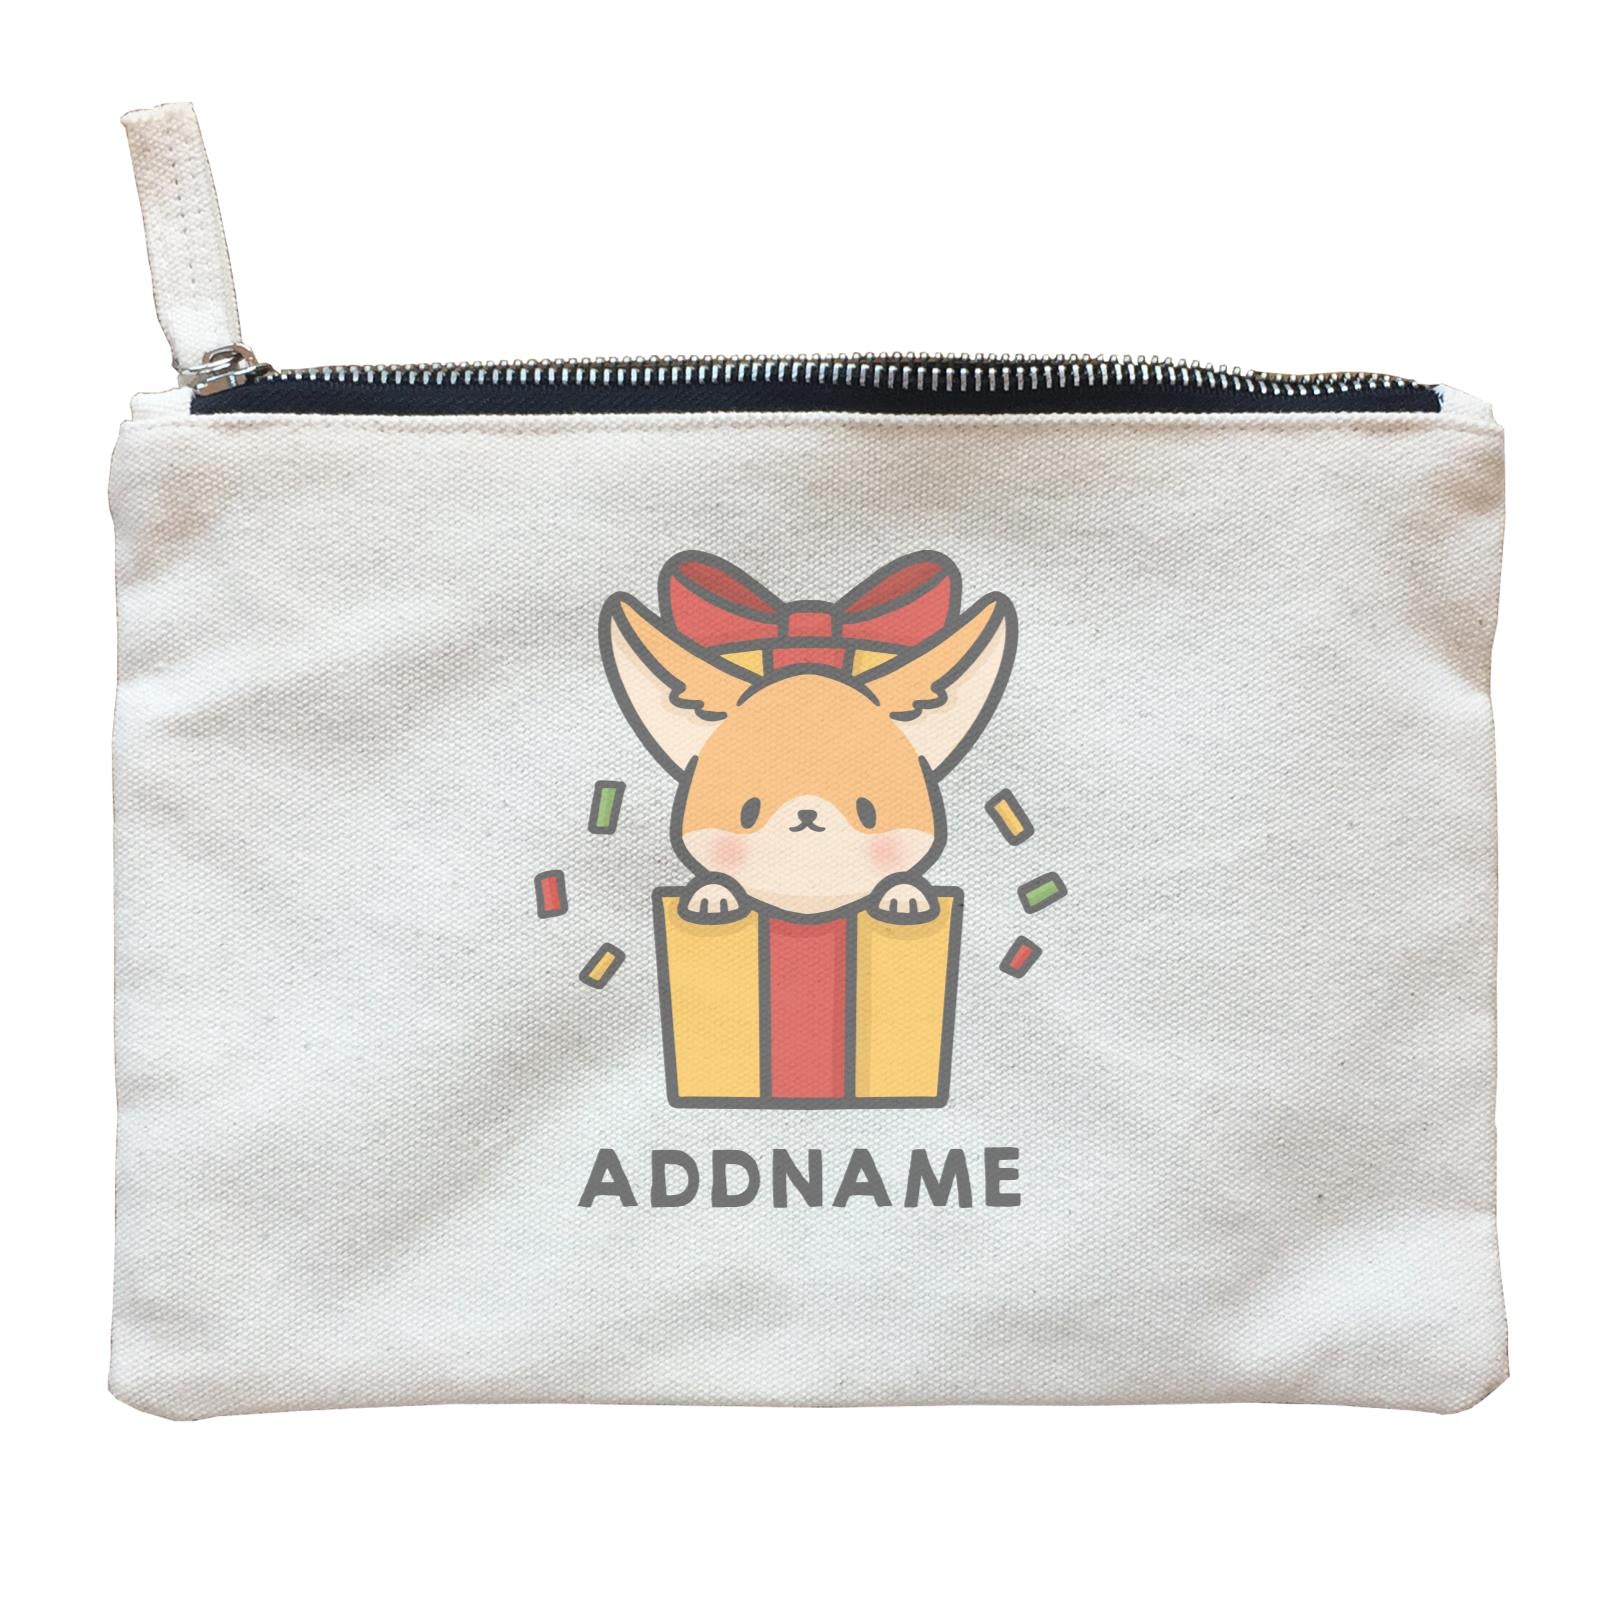 Xmas Cute Dog In Gift Box Addname Accessories Zipper Pouch